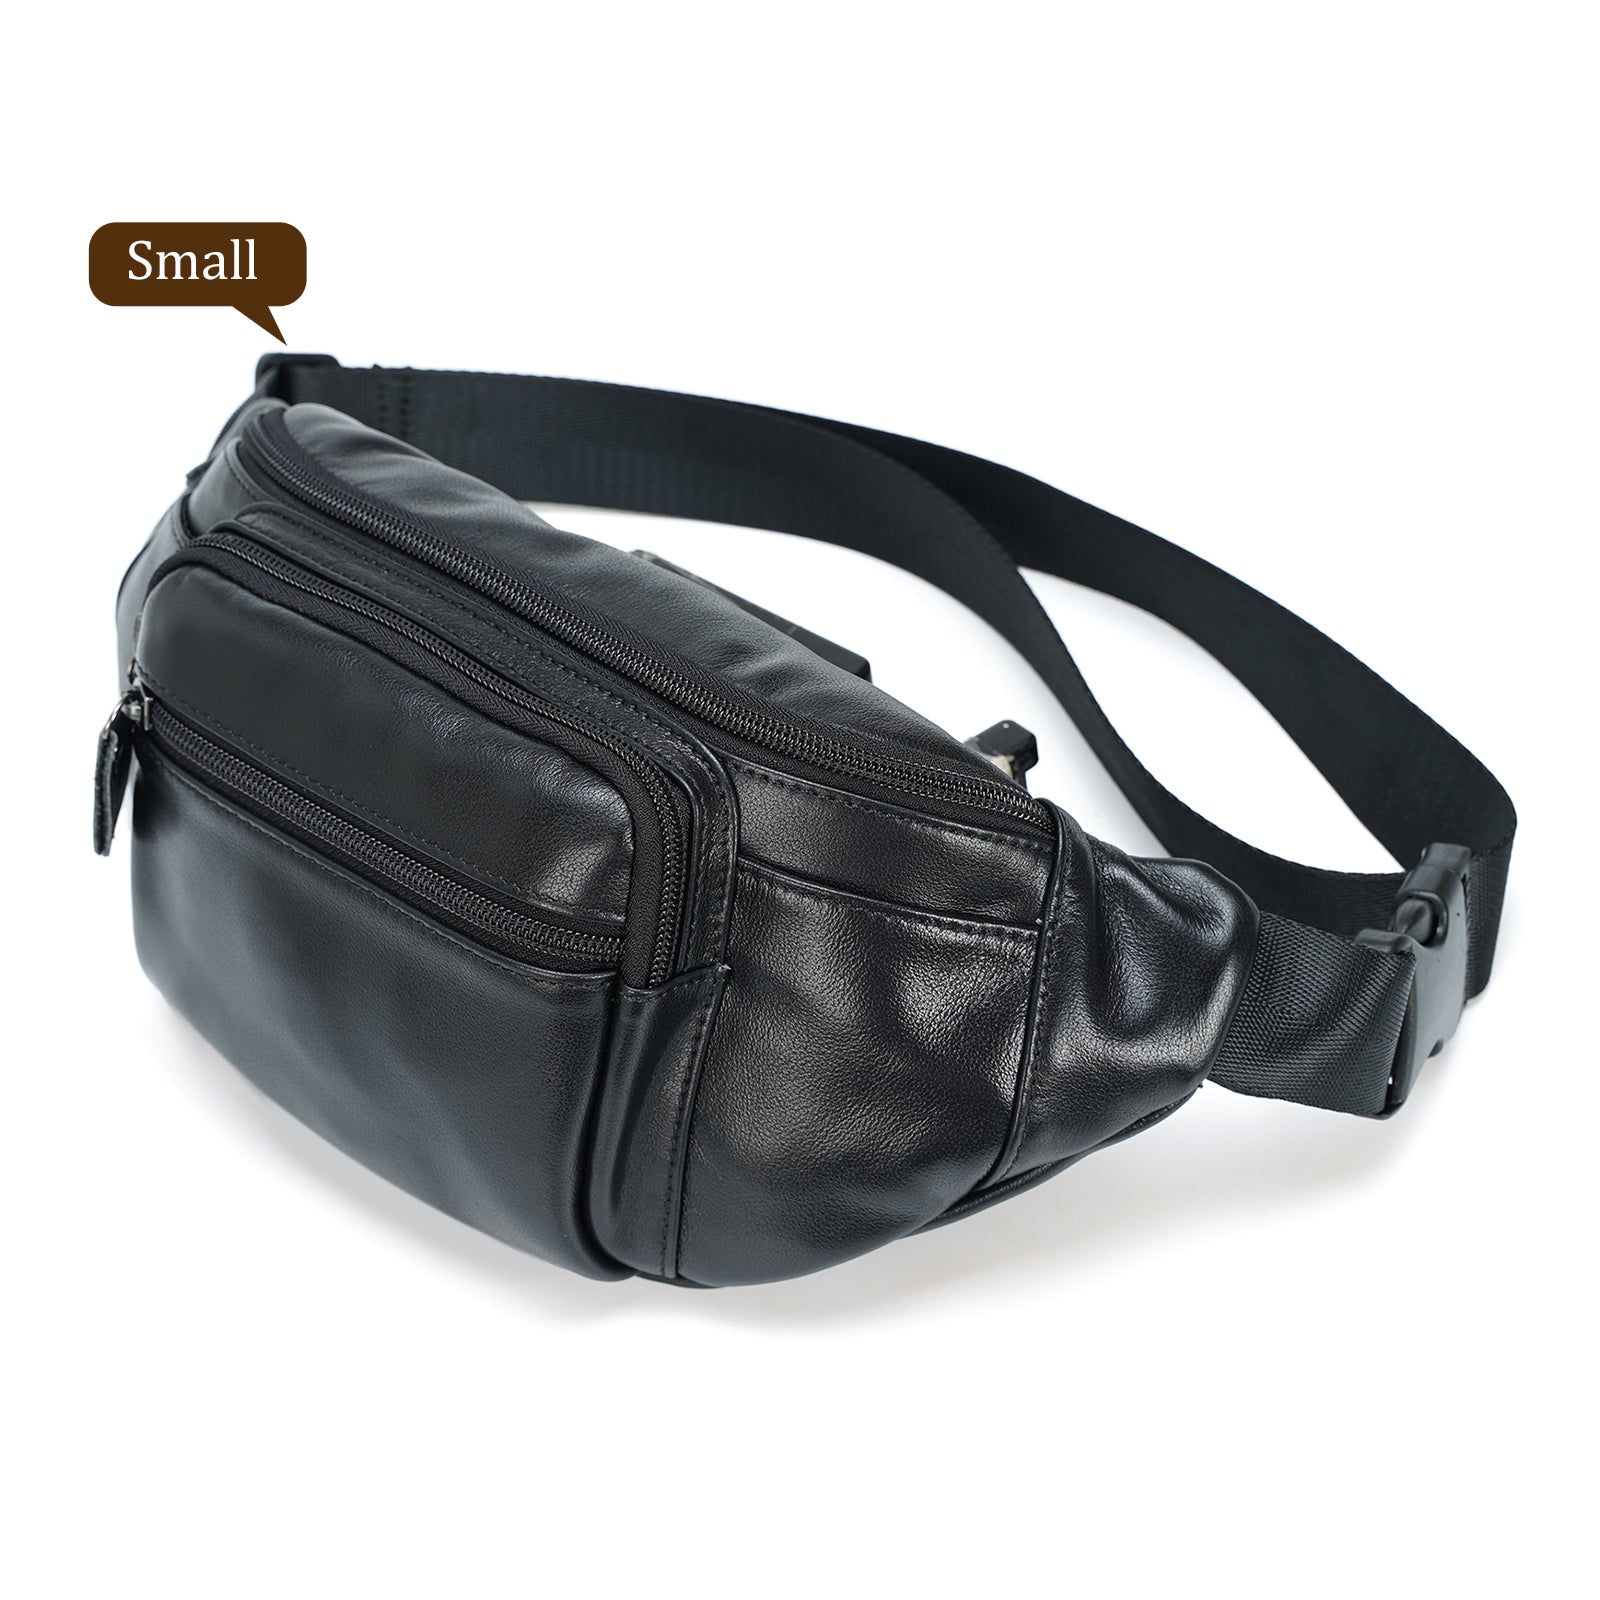 Polare Genuine Leather Fanny Pack/Waist Bag (Small)